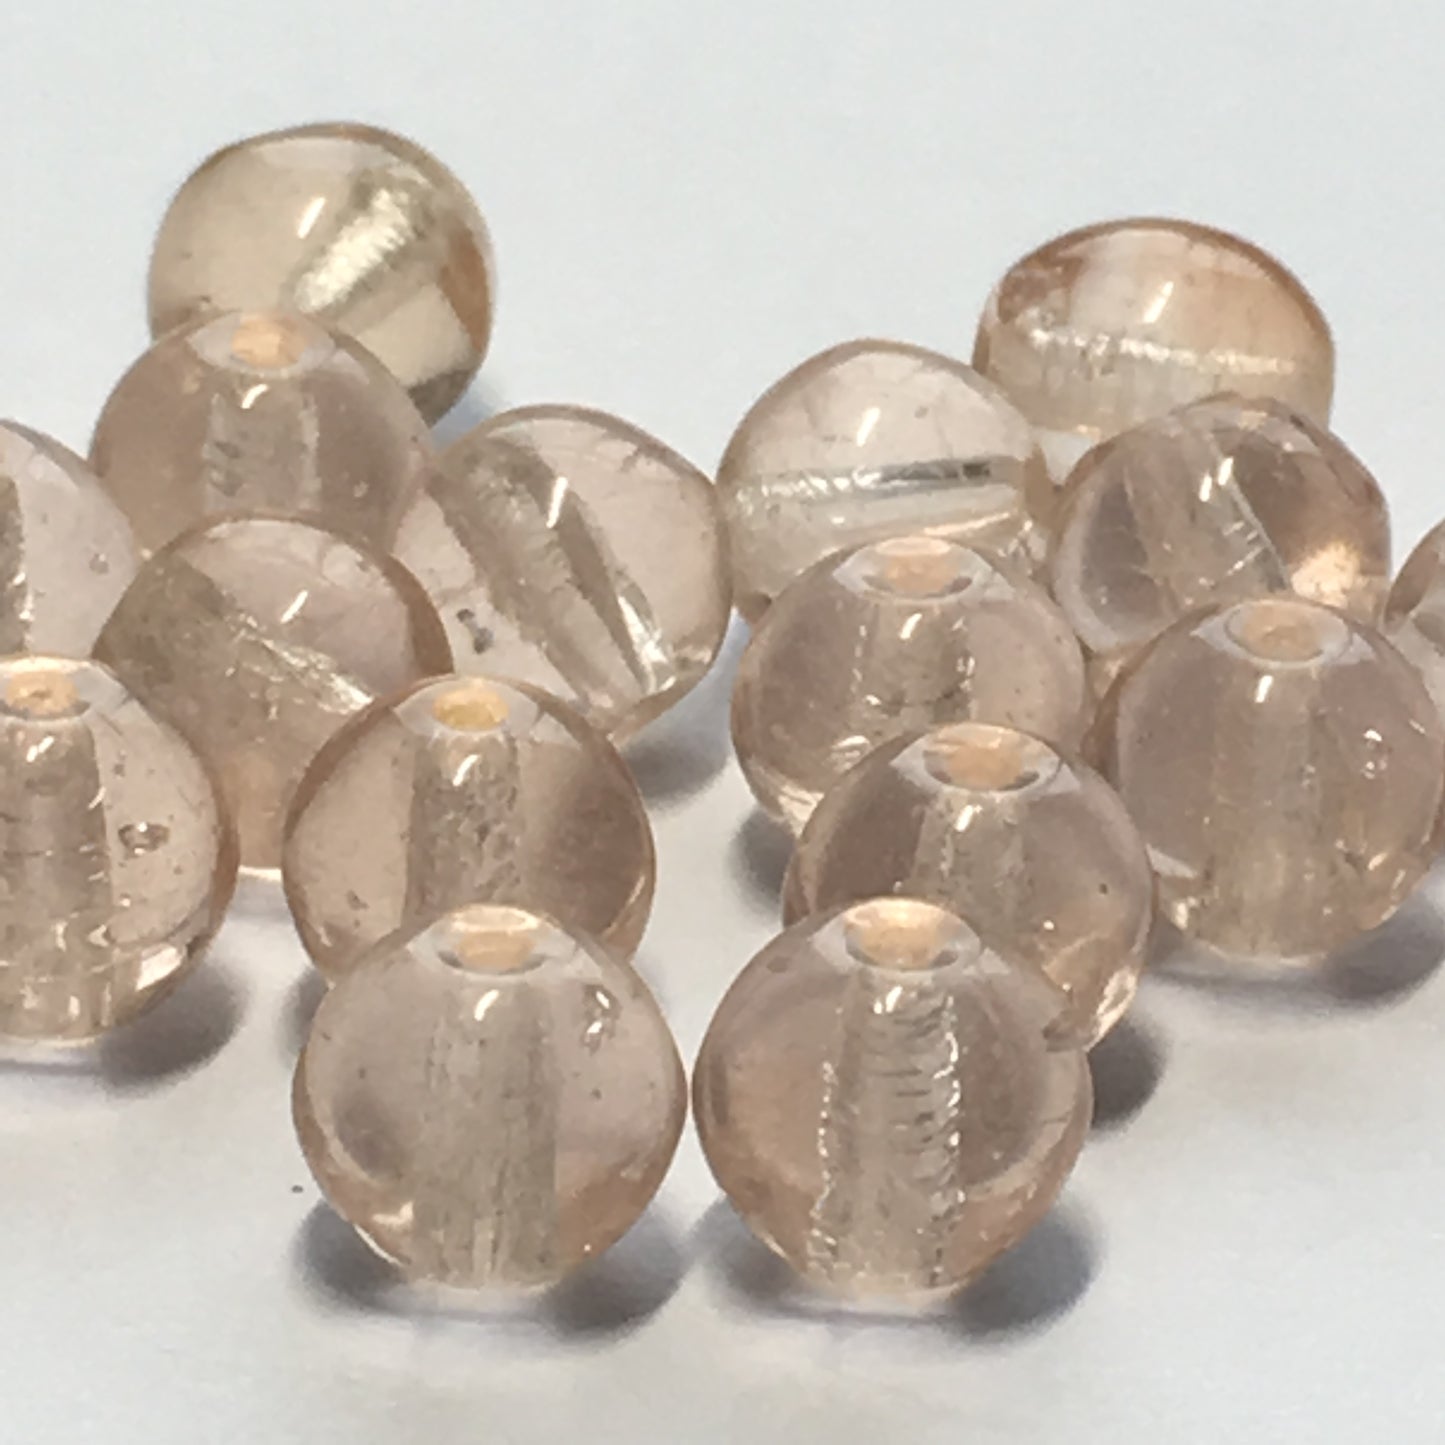 Transparent Pale Pink Round Glass Beads, 6 mm - 28 Beads